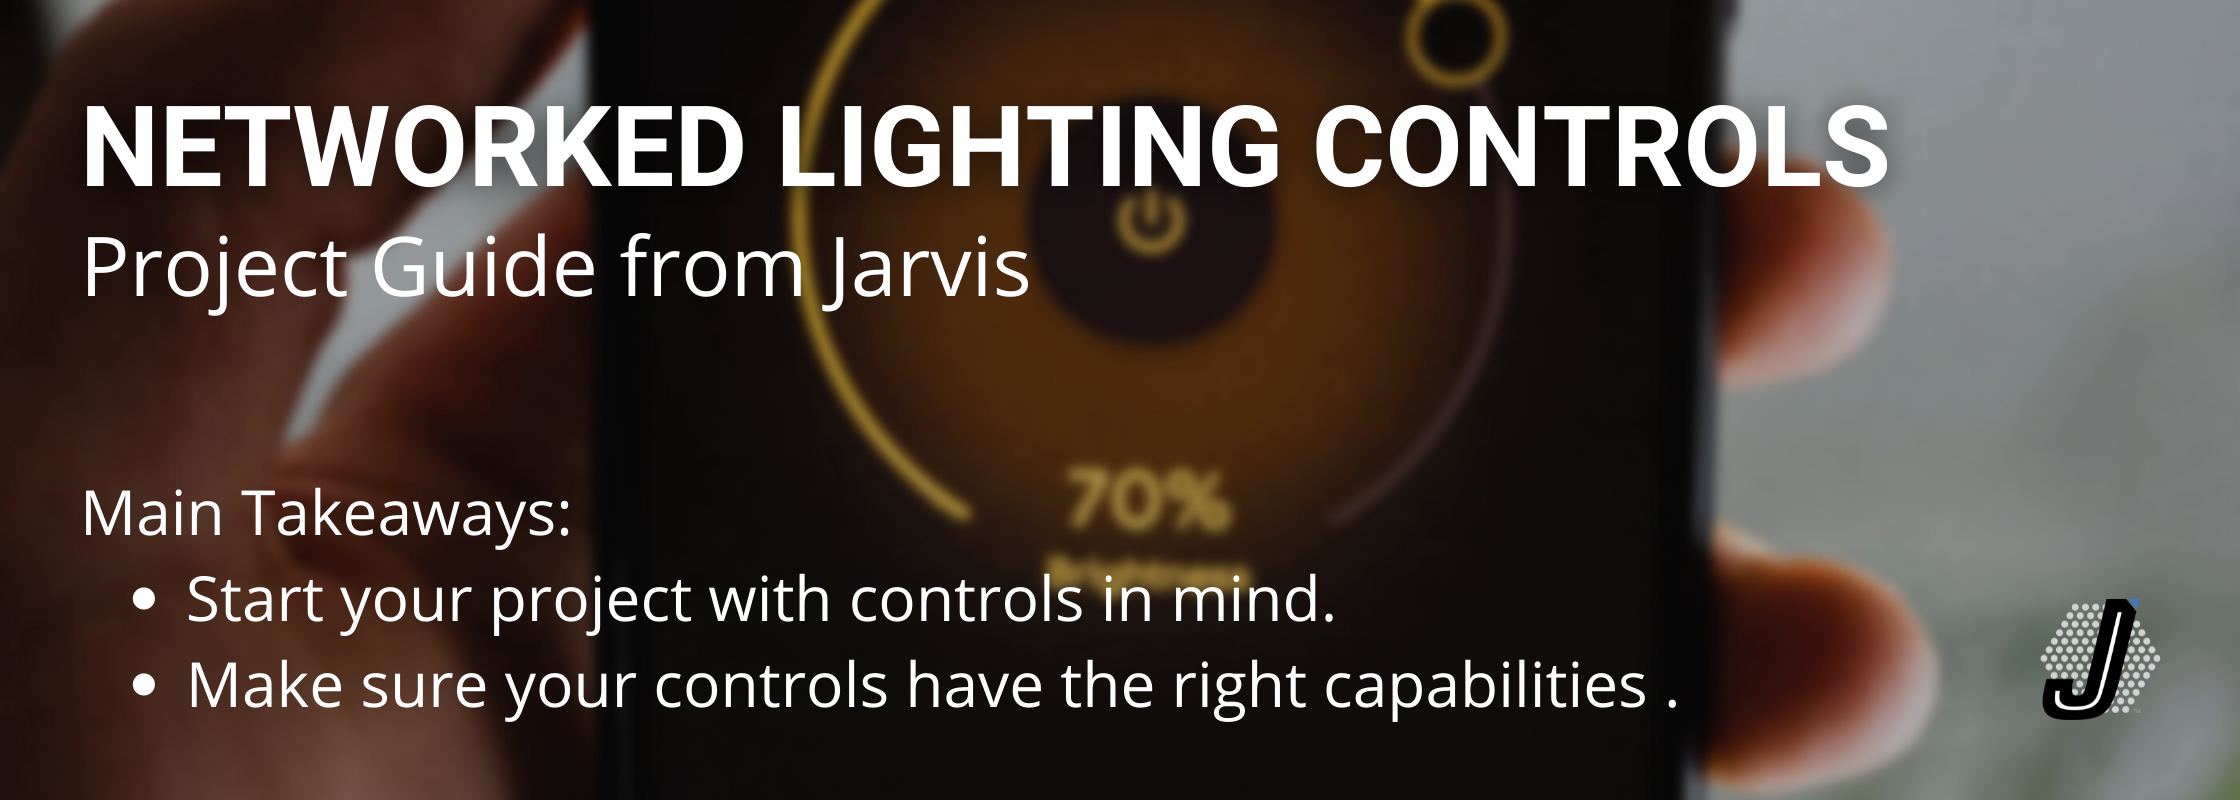 Networked Lighting Controls Project Guide - Main Takeaways